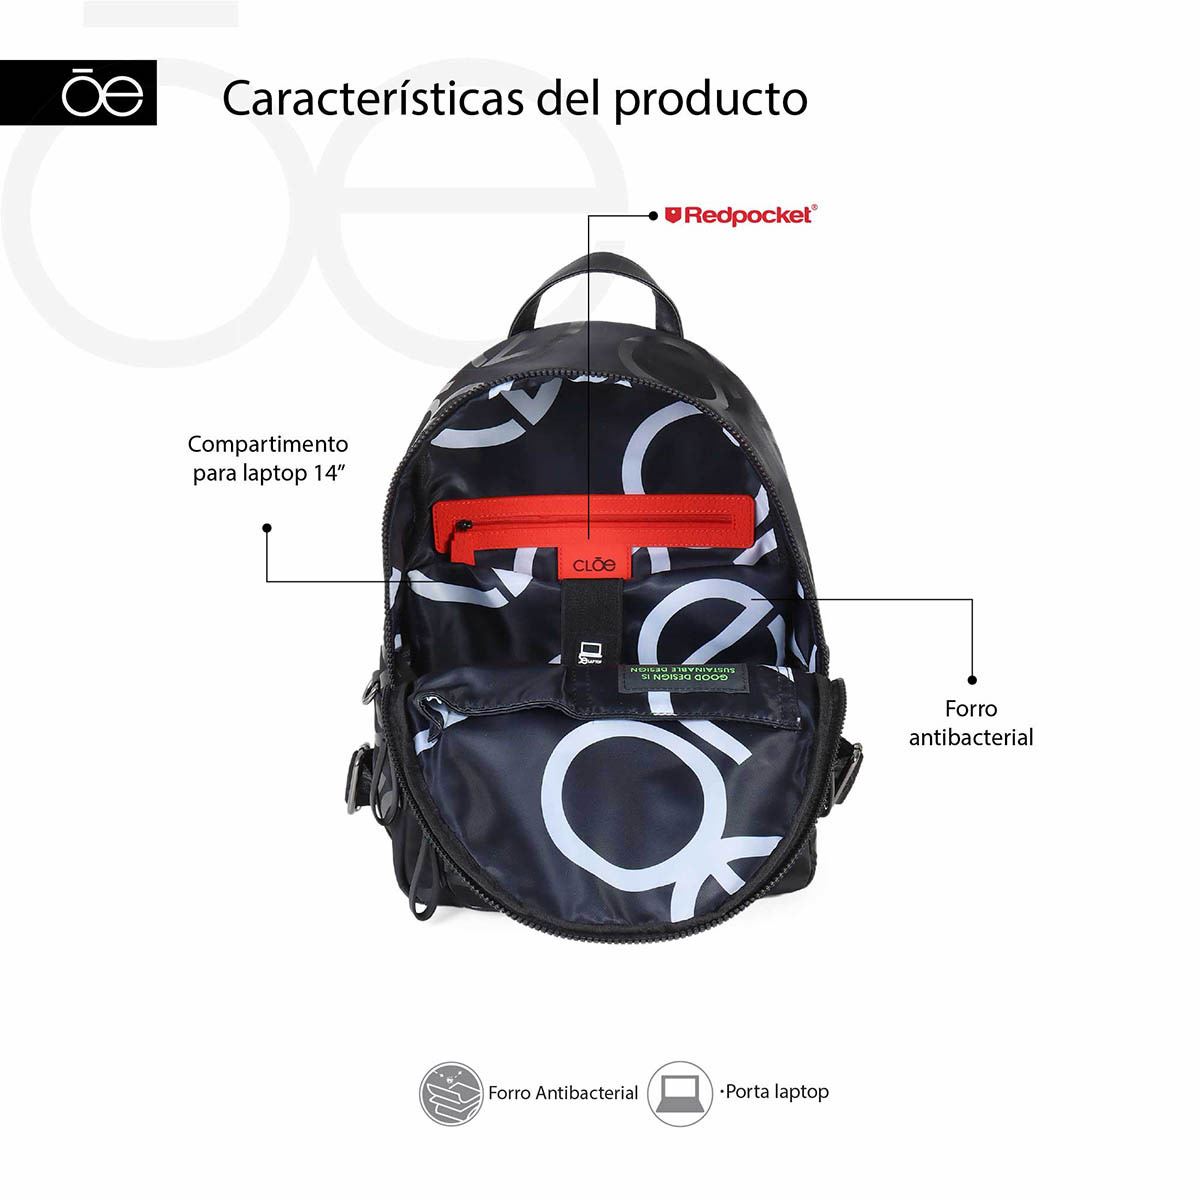 CleverBag Cosmetics · Sac poubelle 3l